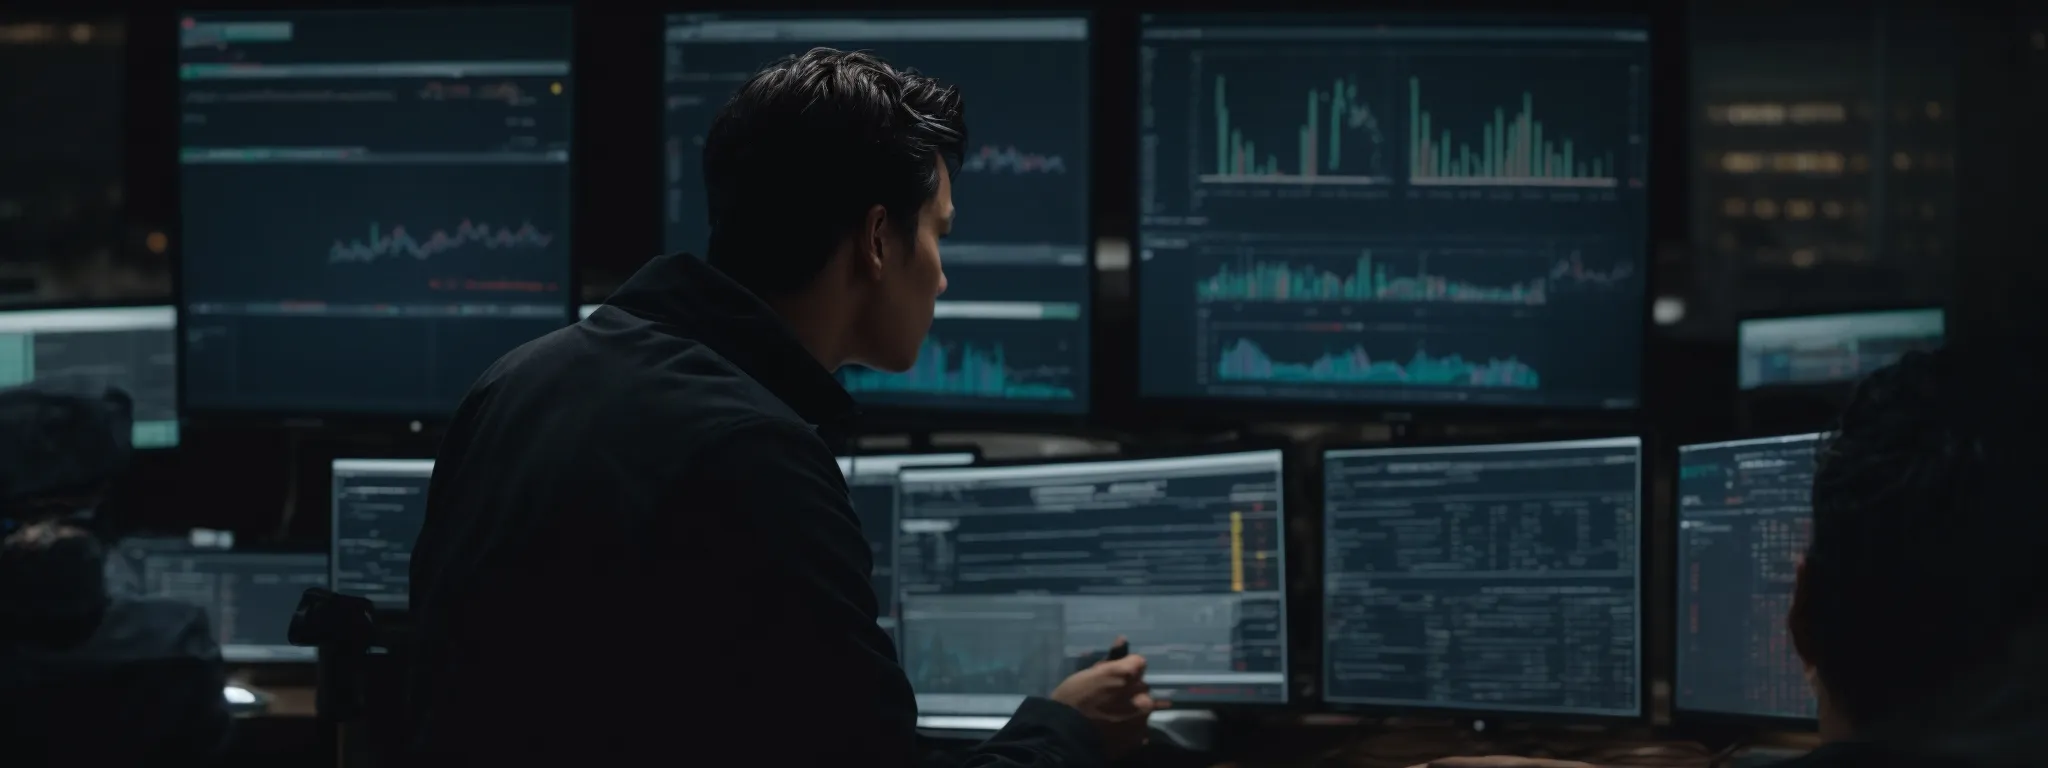 a focused individual explores real-time data analytics on a computer screen, reflecting a dynamic digital marketing strategy.